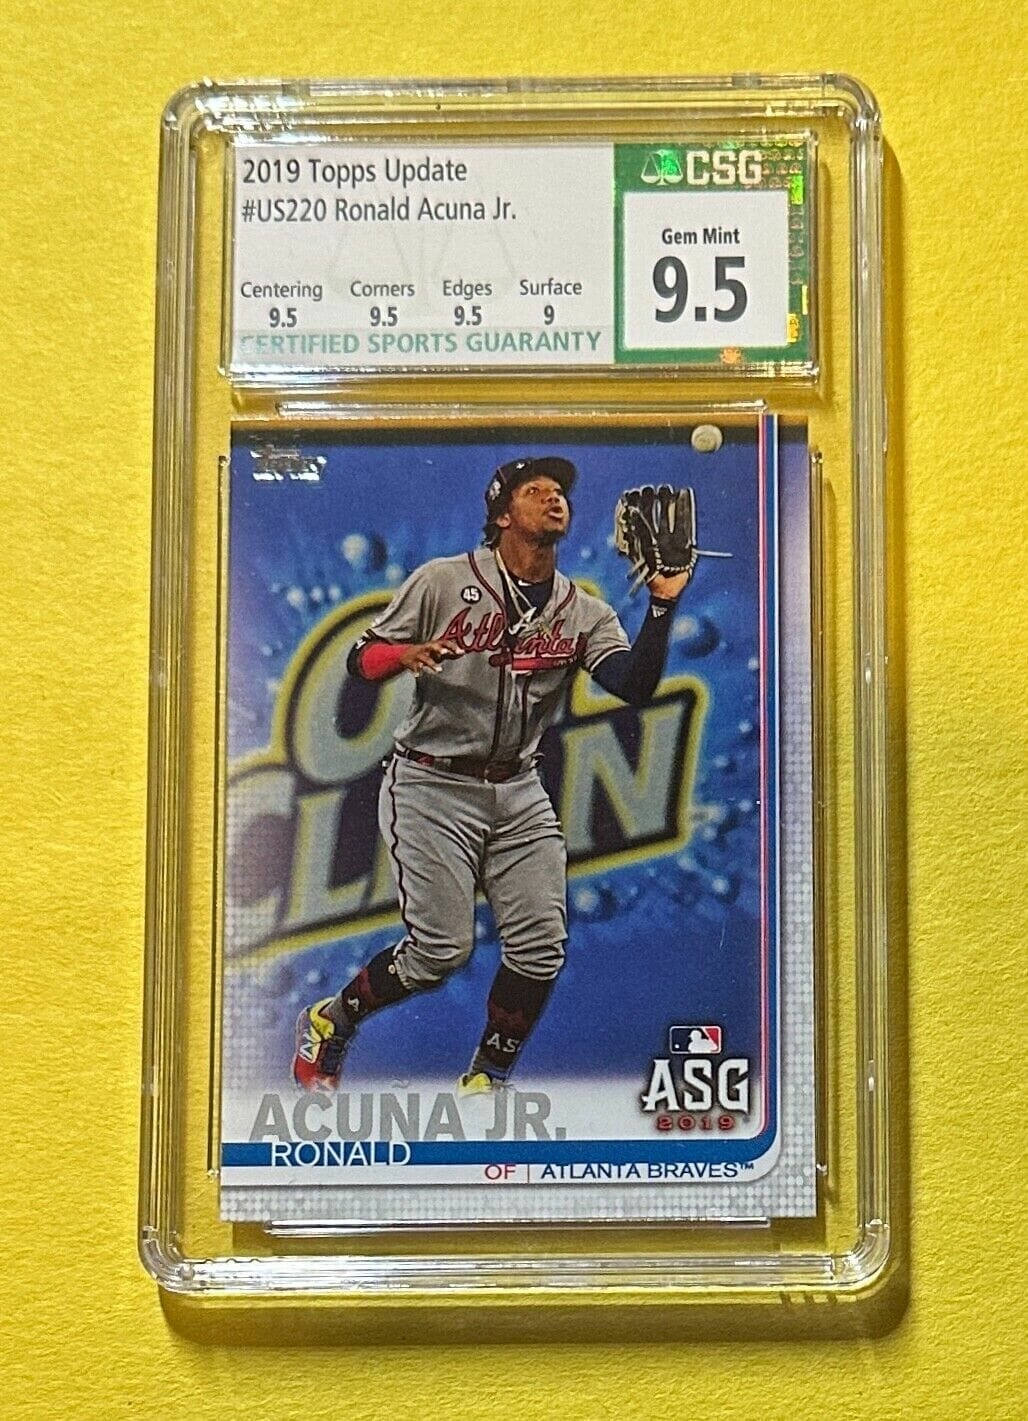 Ronald Acuna Jr. Autographed 2019 Topps Update Card #US220